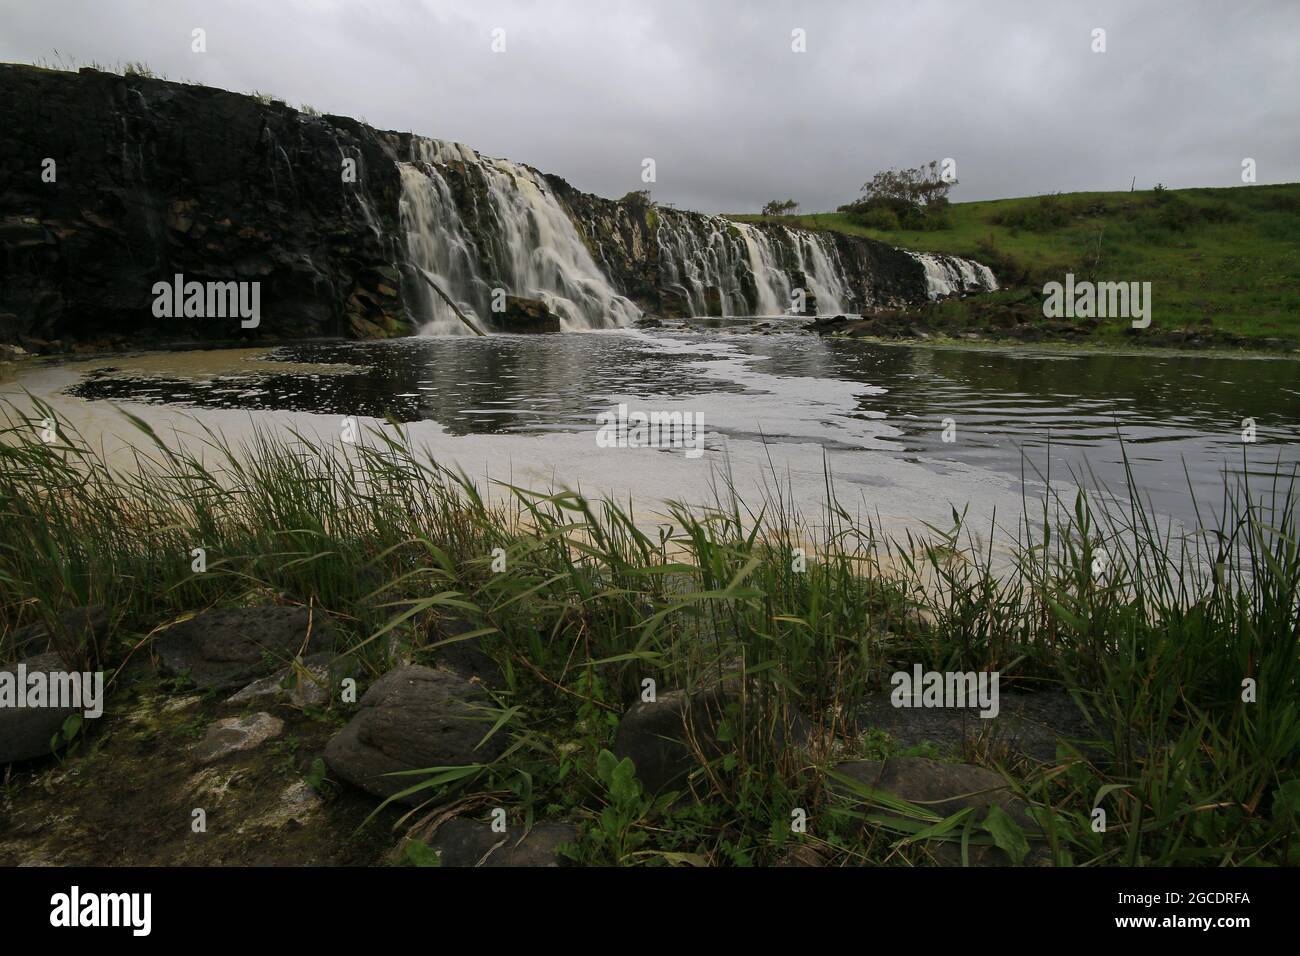 a large waterfall over a body of water Stock Photo